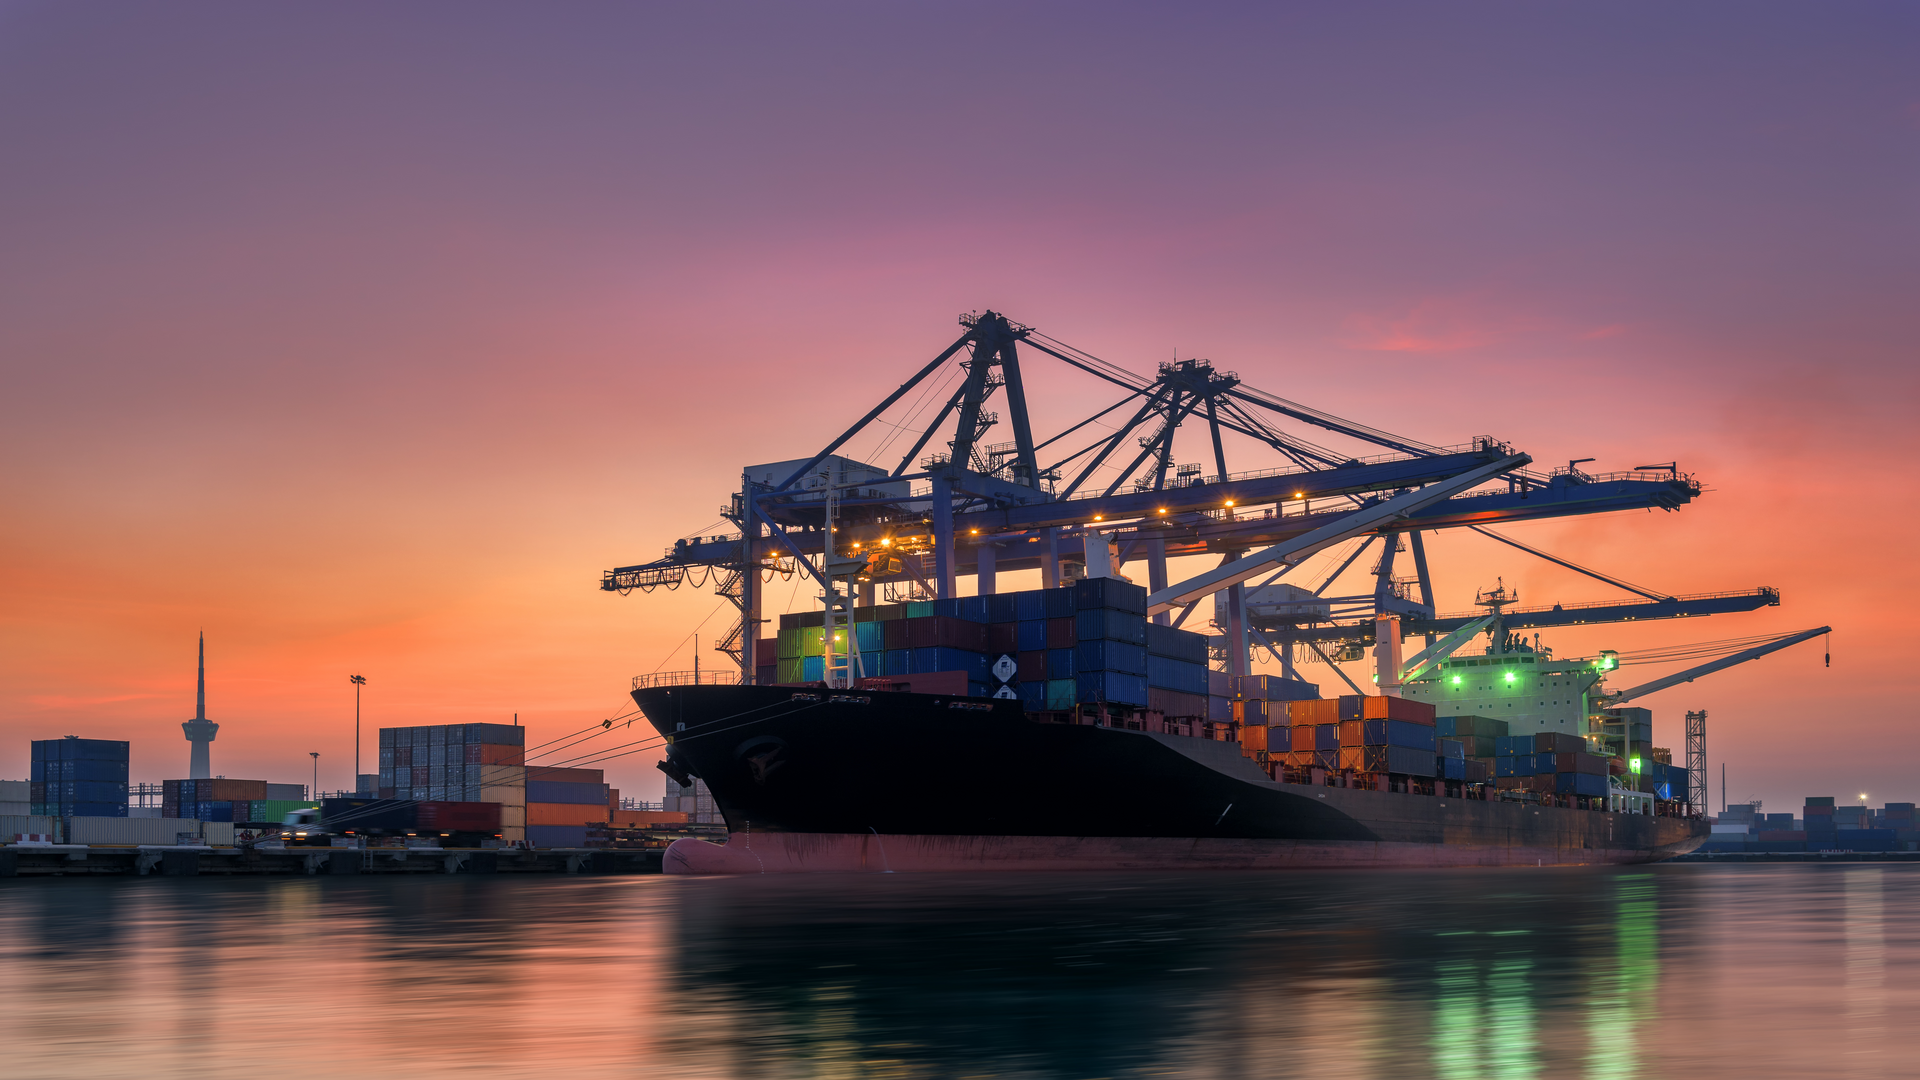 Air pollution from ships or ports harboring a problem?